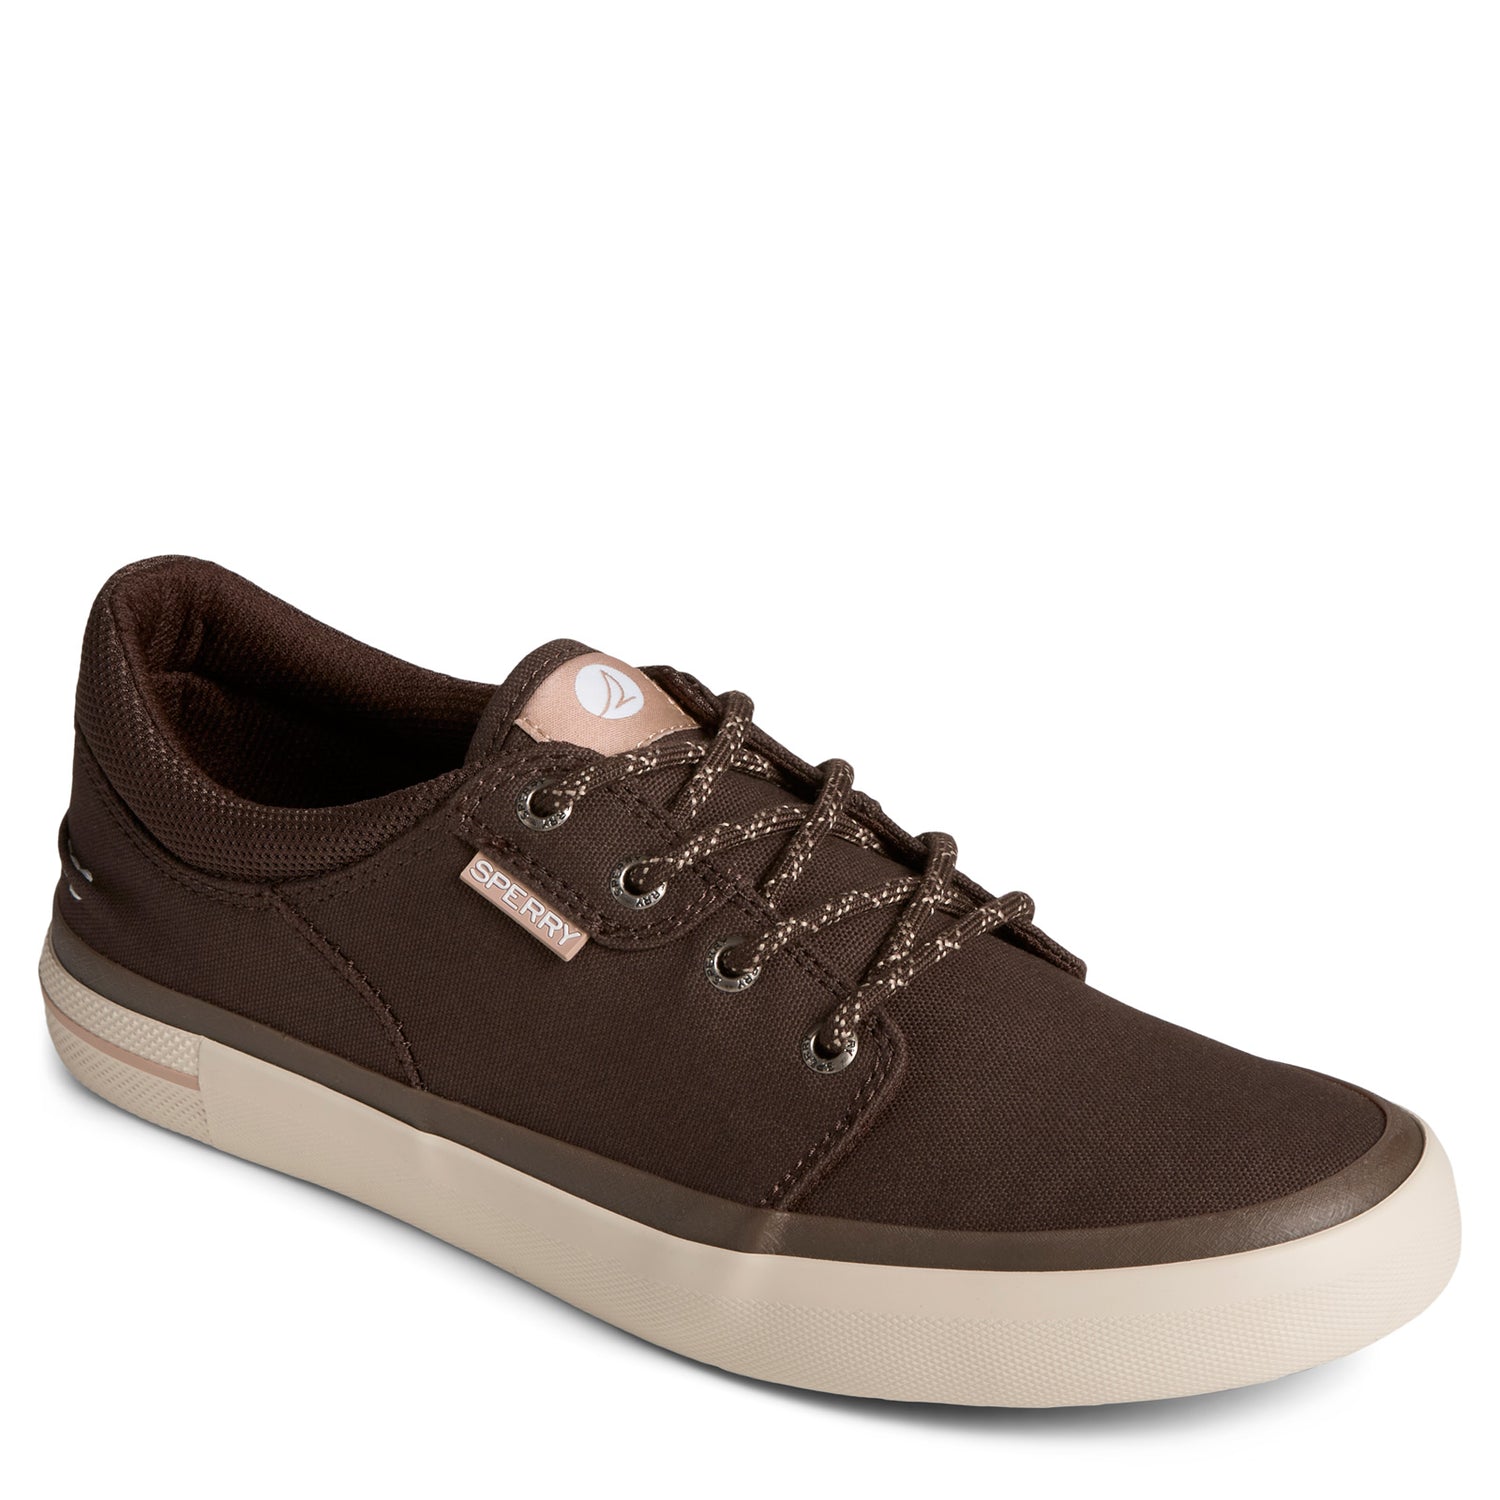 Sperry Mens Coast Line Blucher Sneakers : Sperry